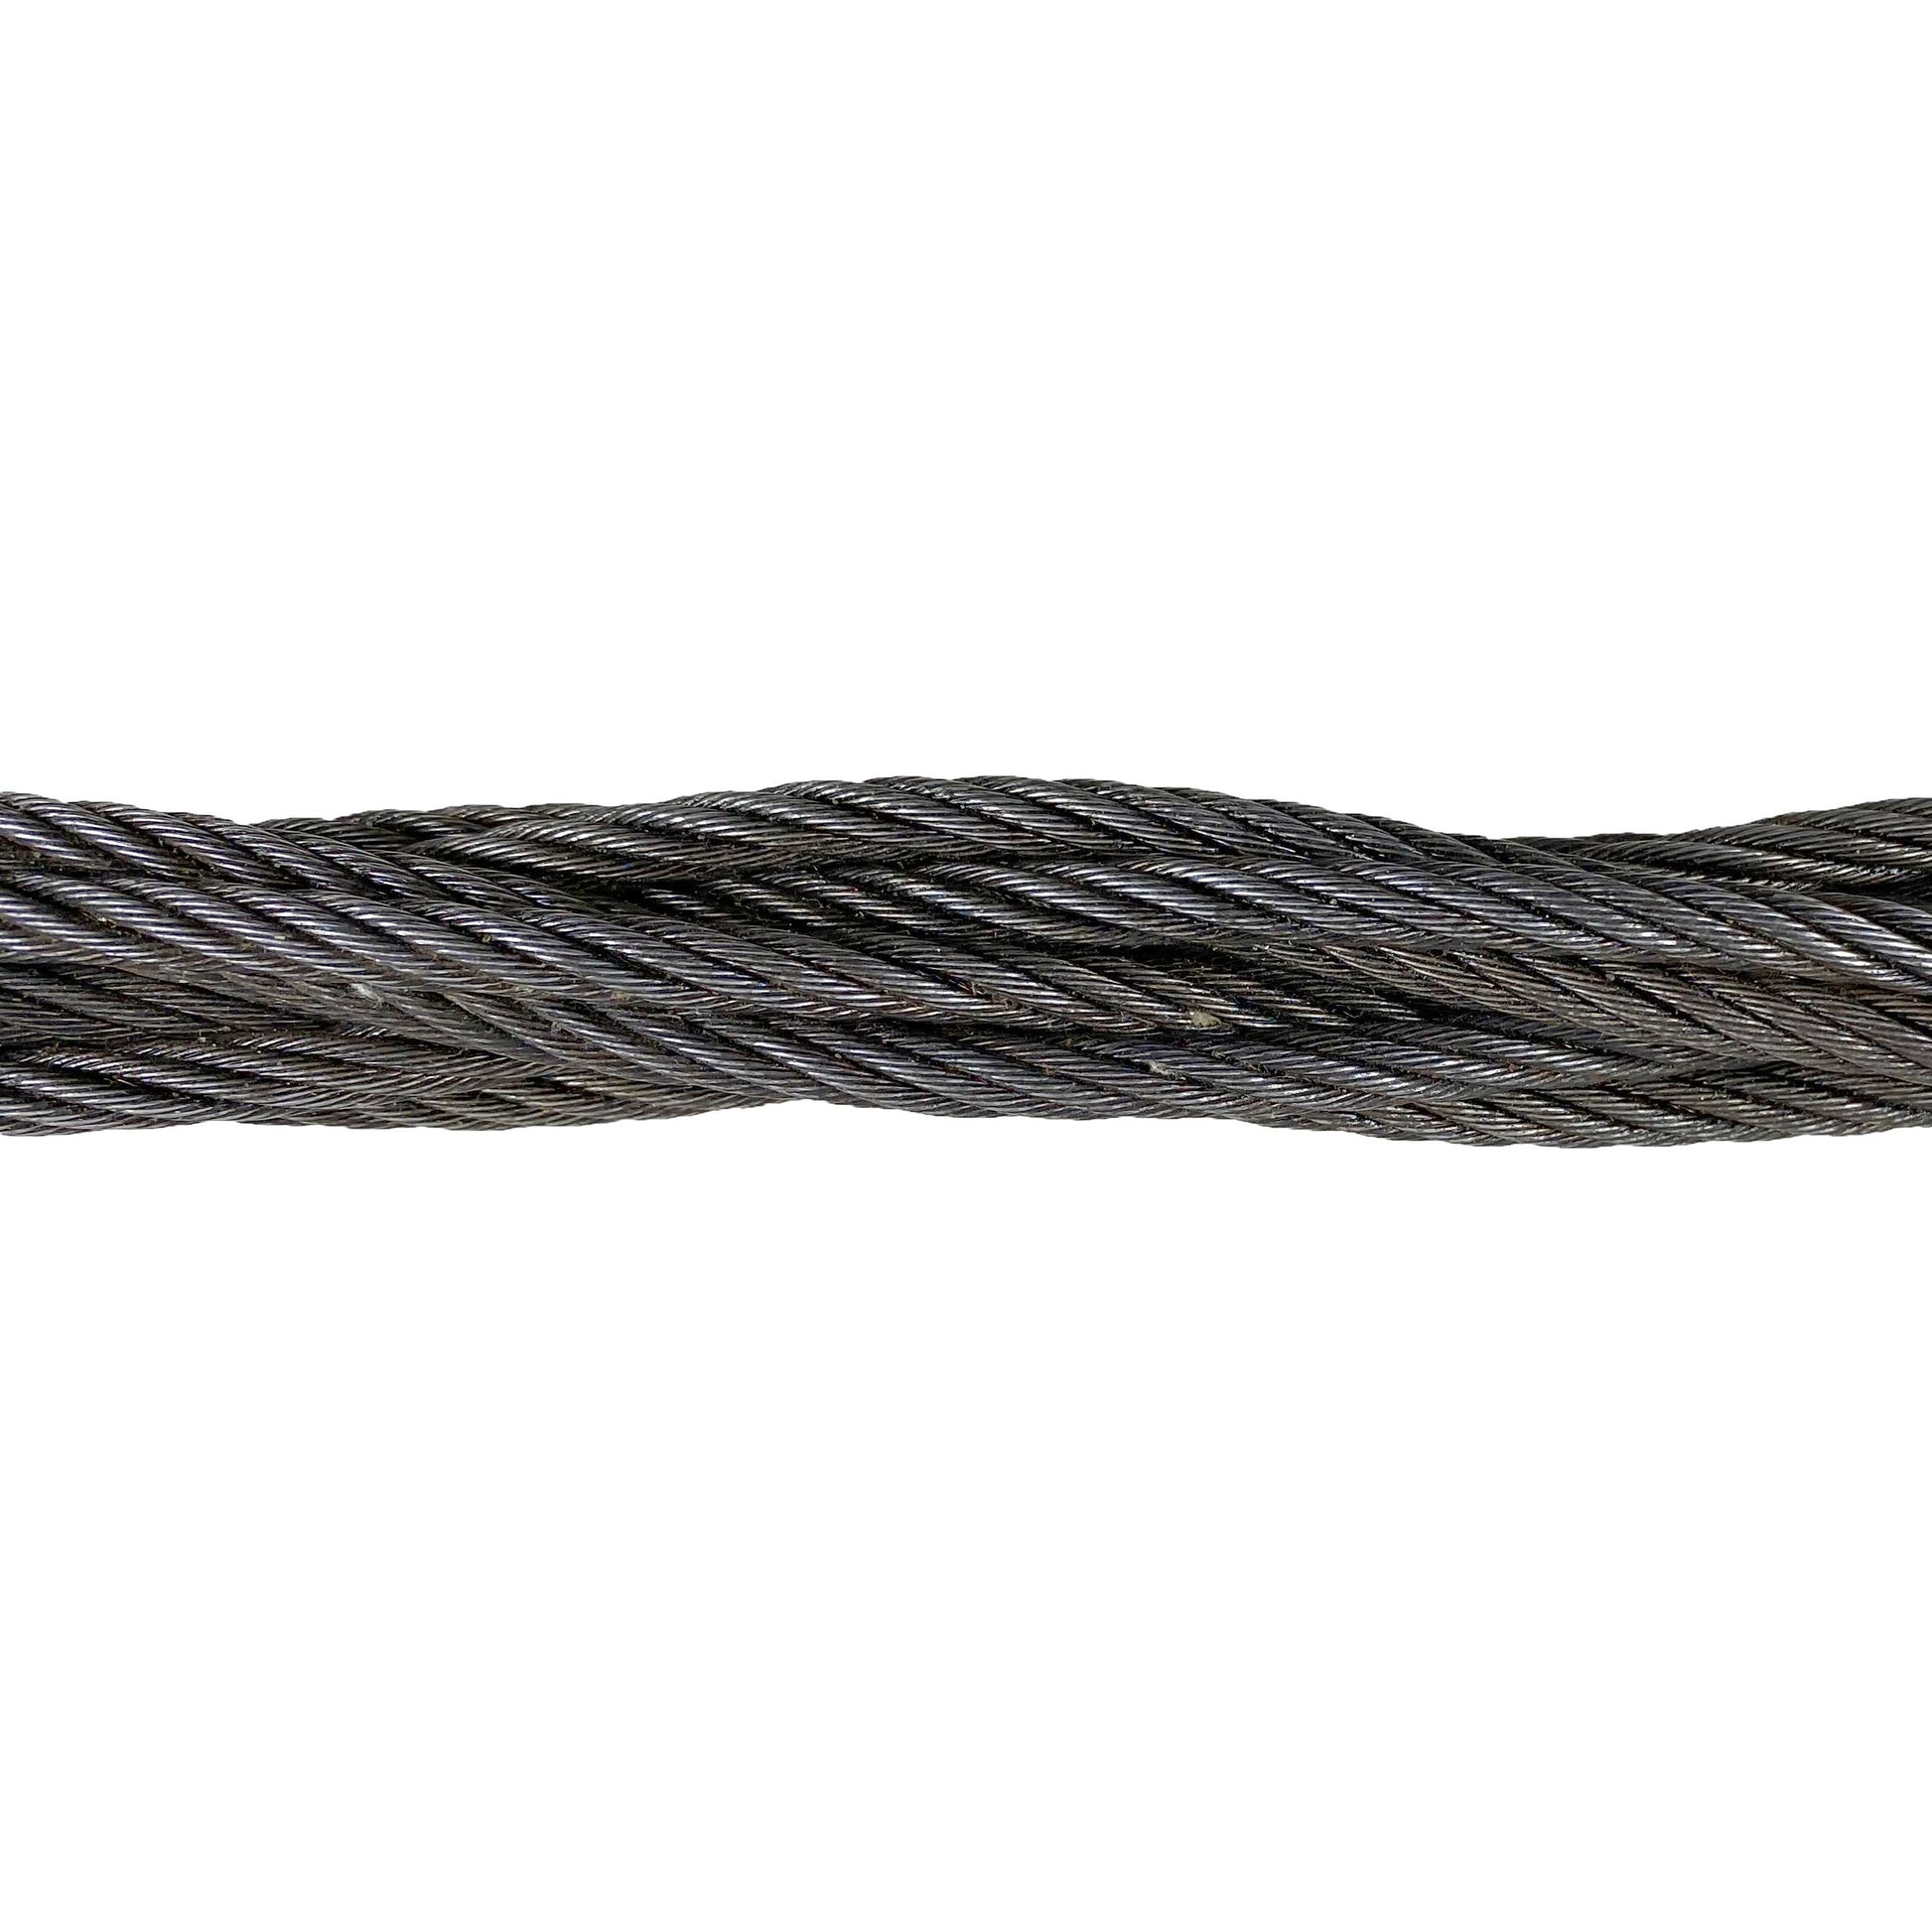 38 inch x 6 foot Nine Part Braided Wire Rope Sling image 3 of 3